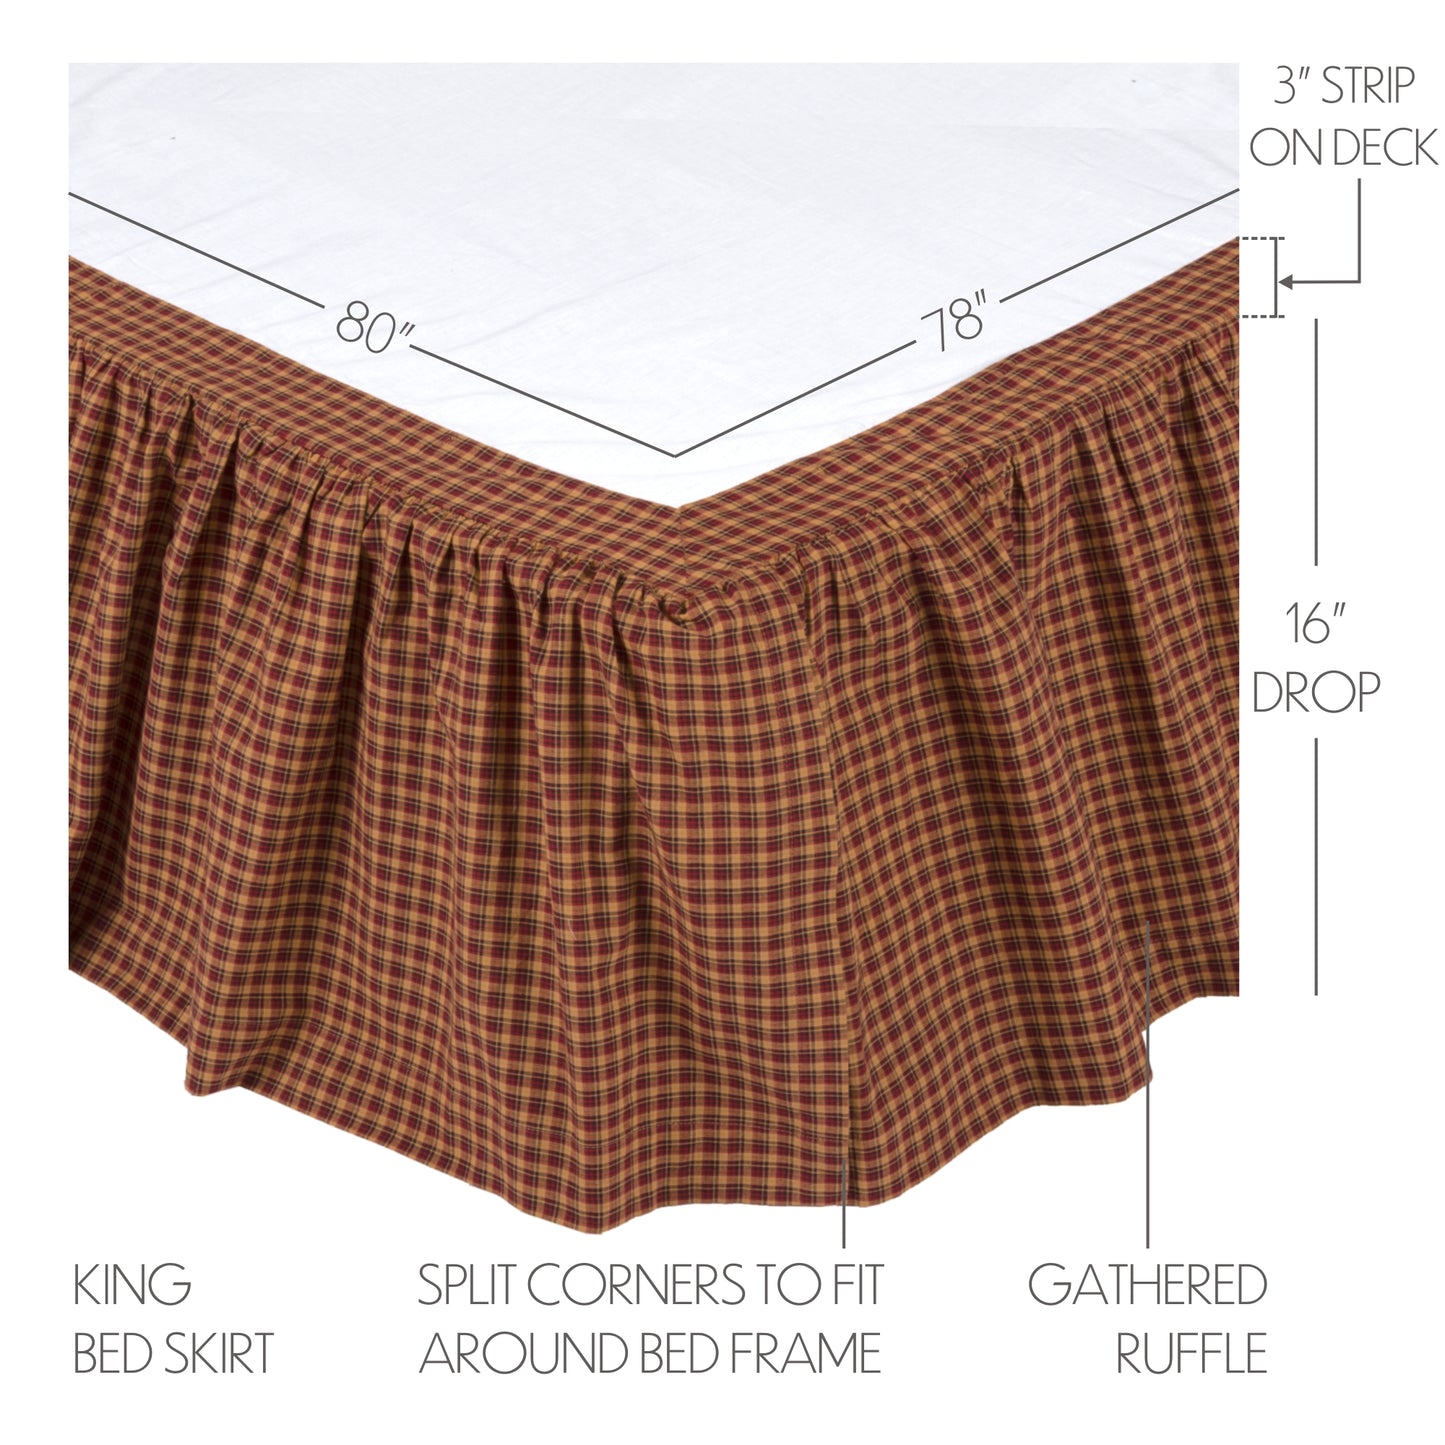 10426-Patriotic-Patch-King-Bed-Skirt-78x80x16-image-1